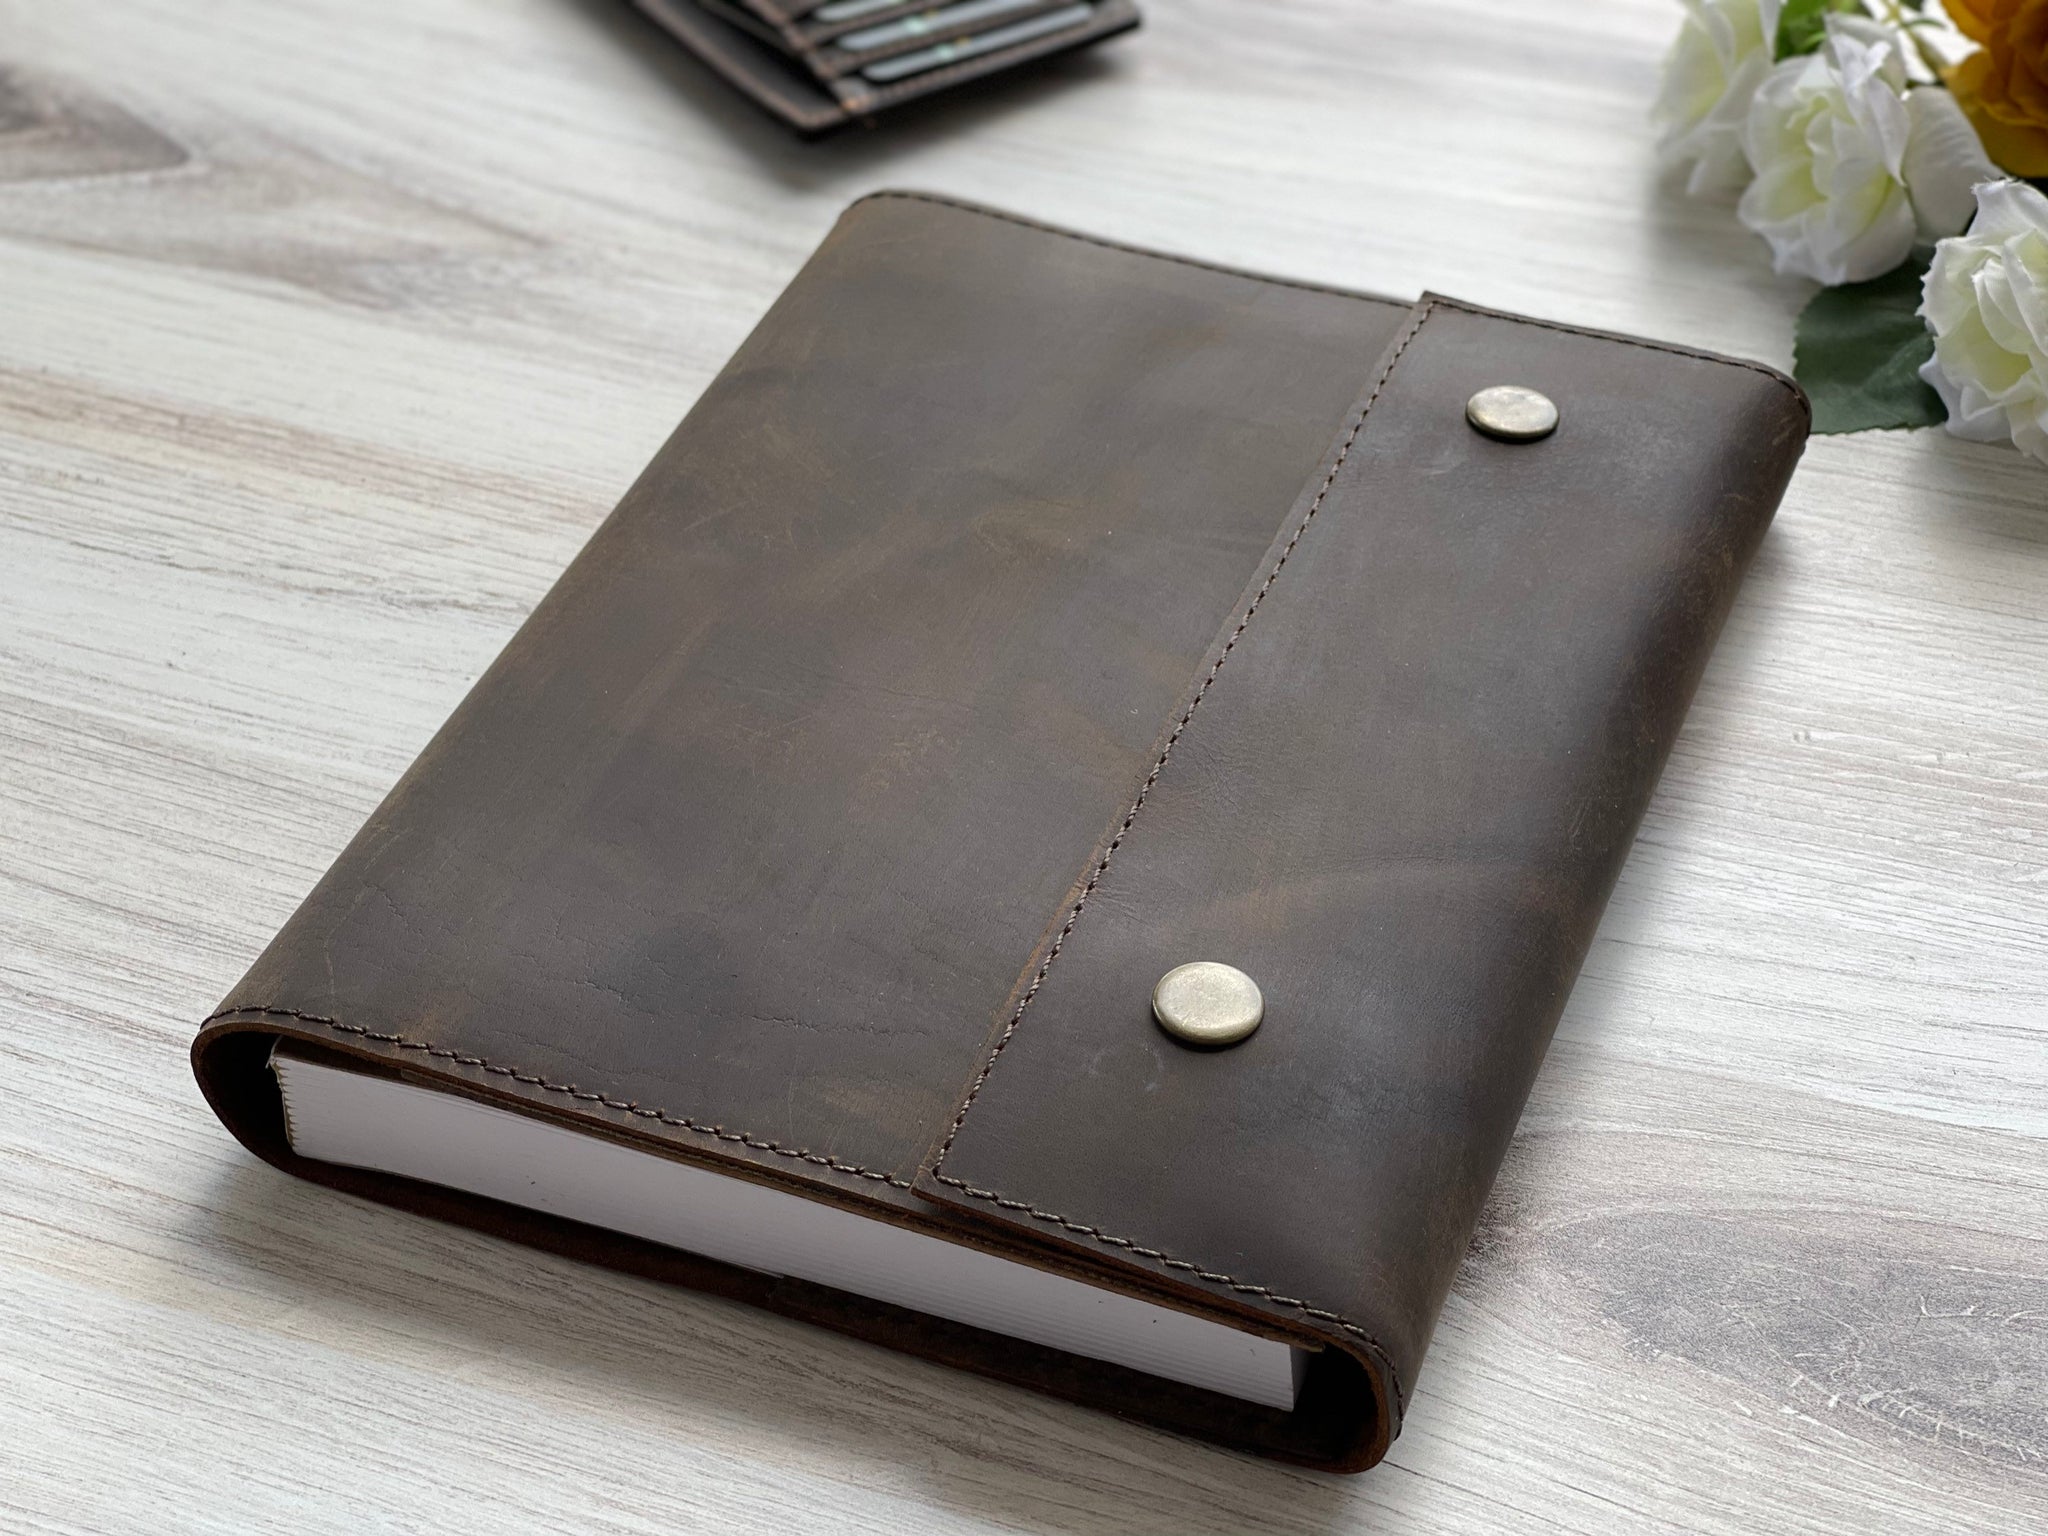 Christmas Gift for Her, Personalized Leather Journal, Custom Refillable Journal Cover, Leather Diary, Personalized Notebook